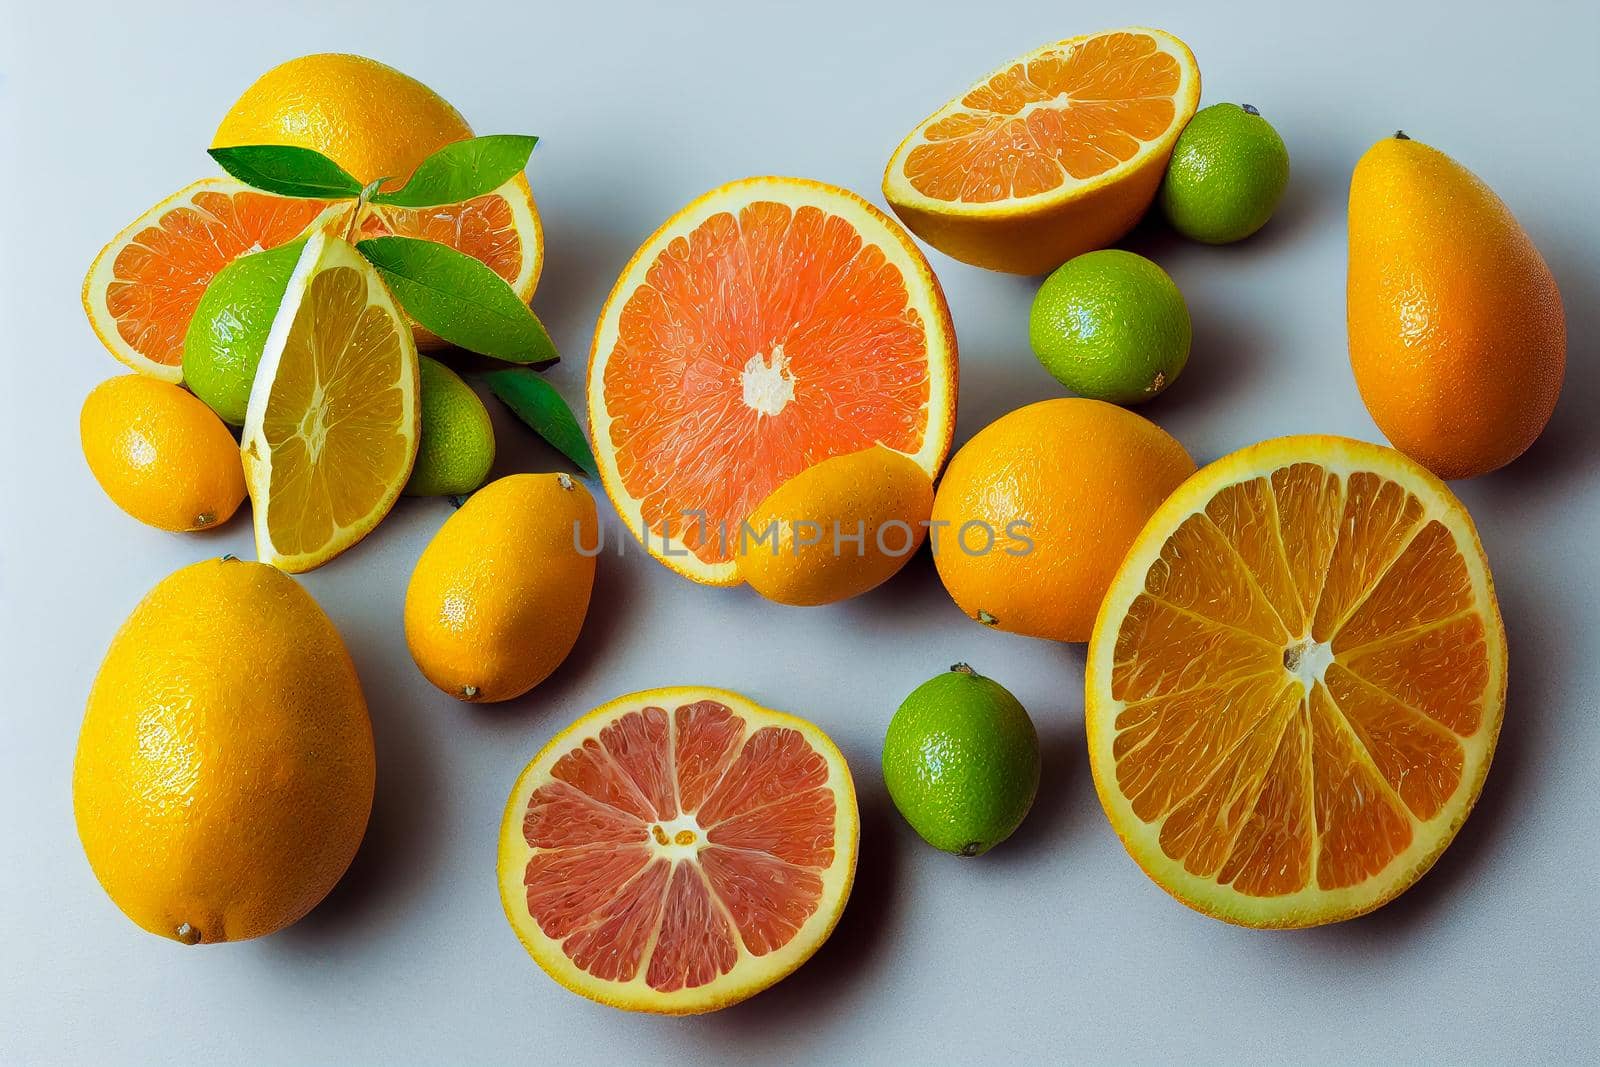 Different citrus fruit on grey background. Whole and sliced fruit. Food background. Healthy eating and diet.